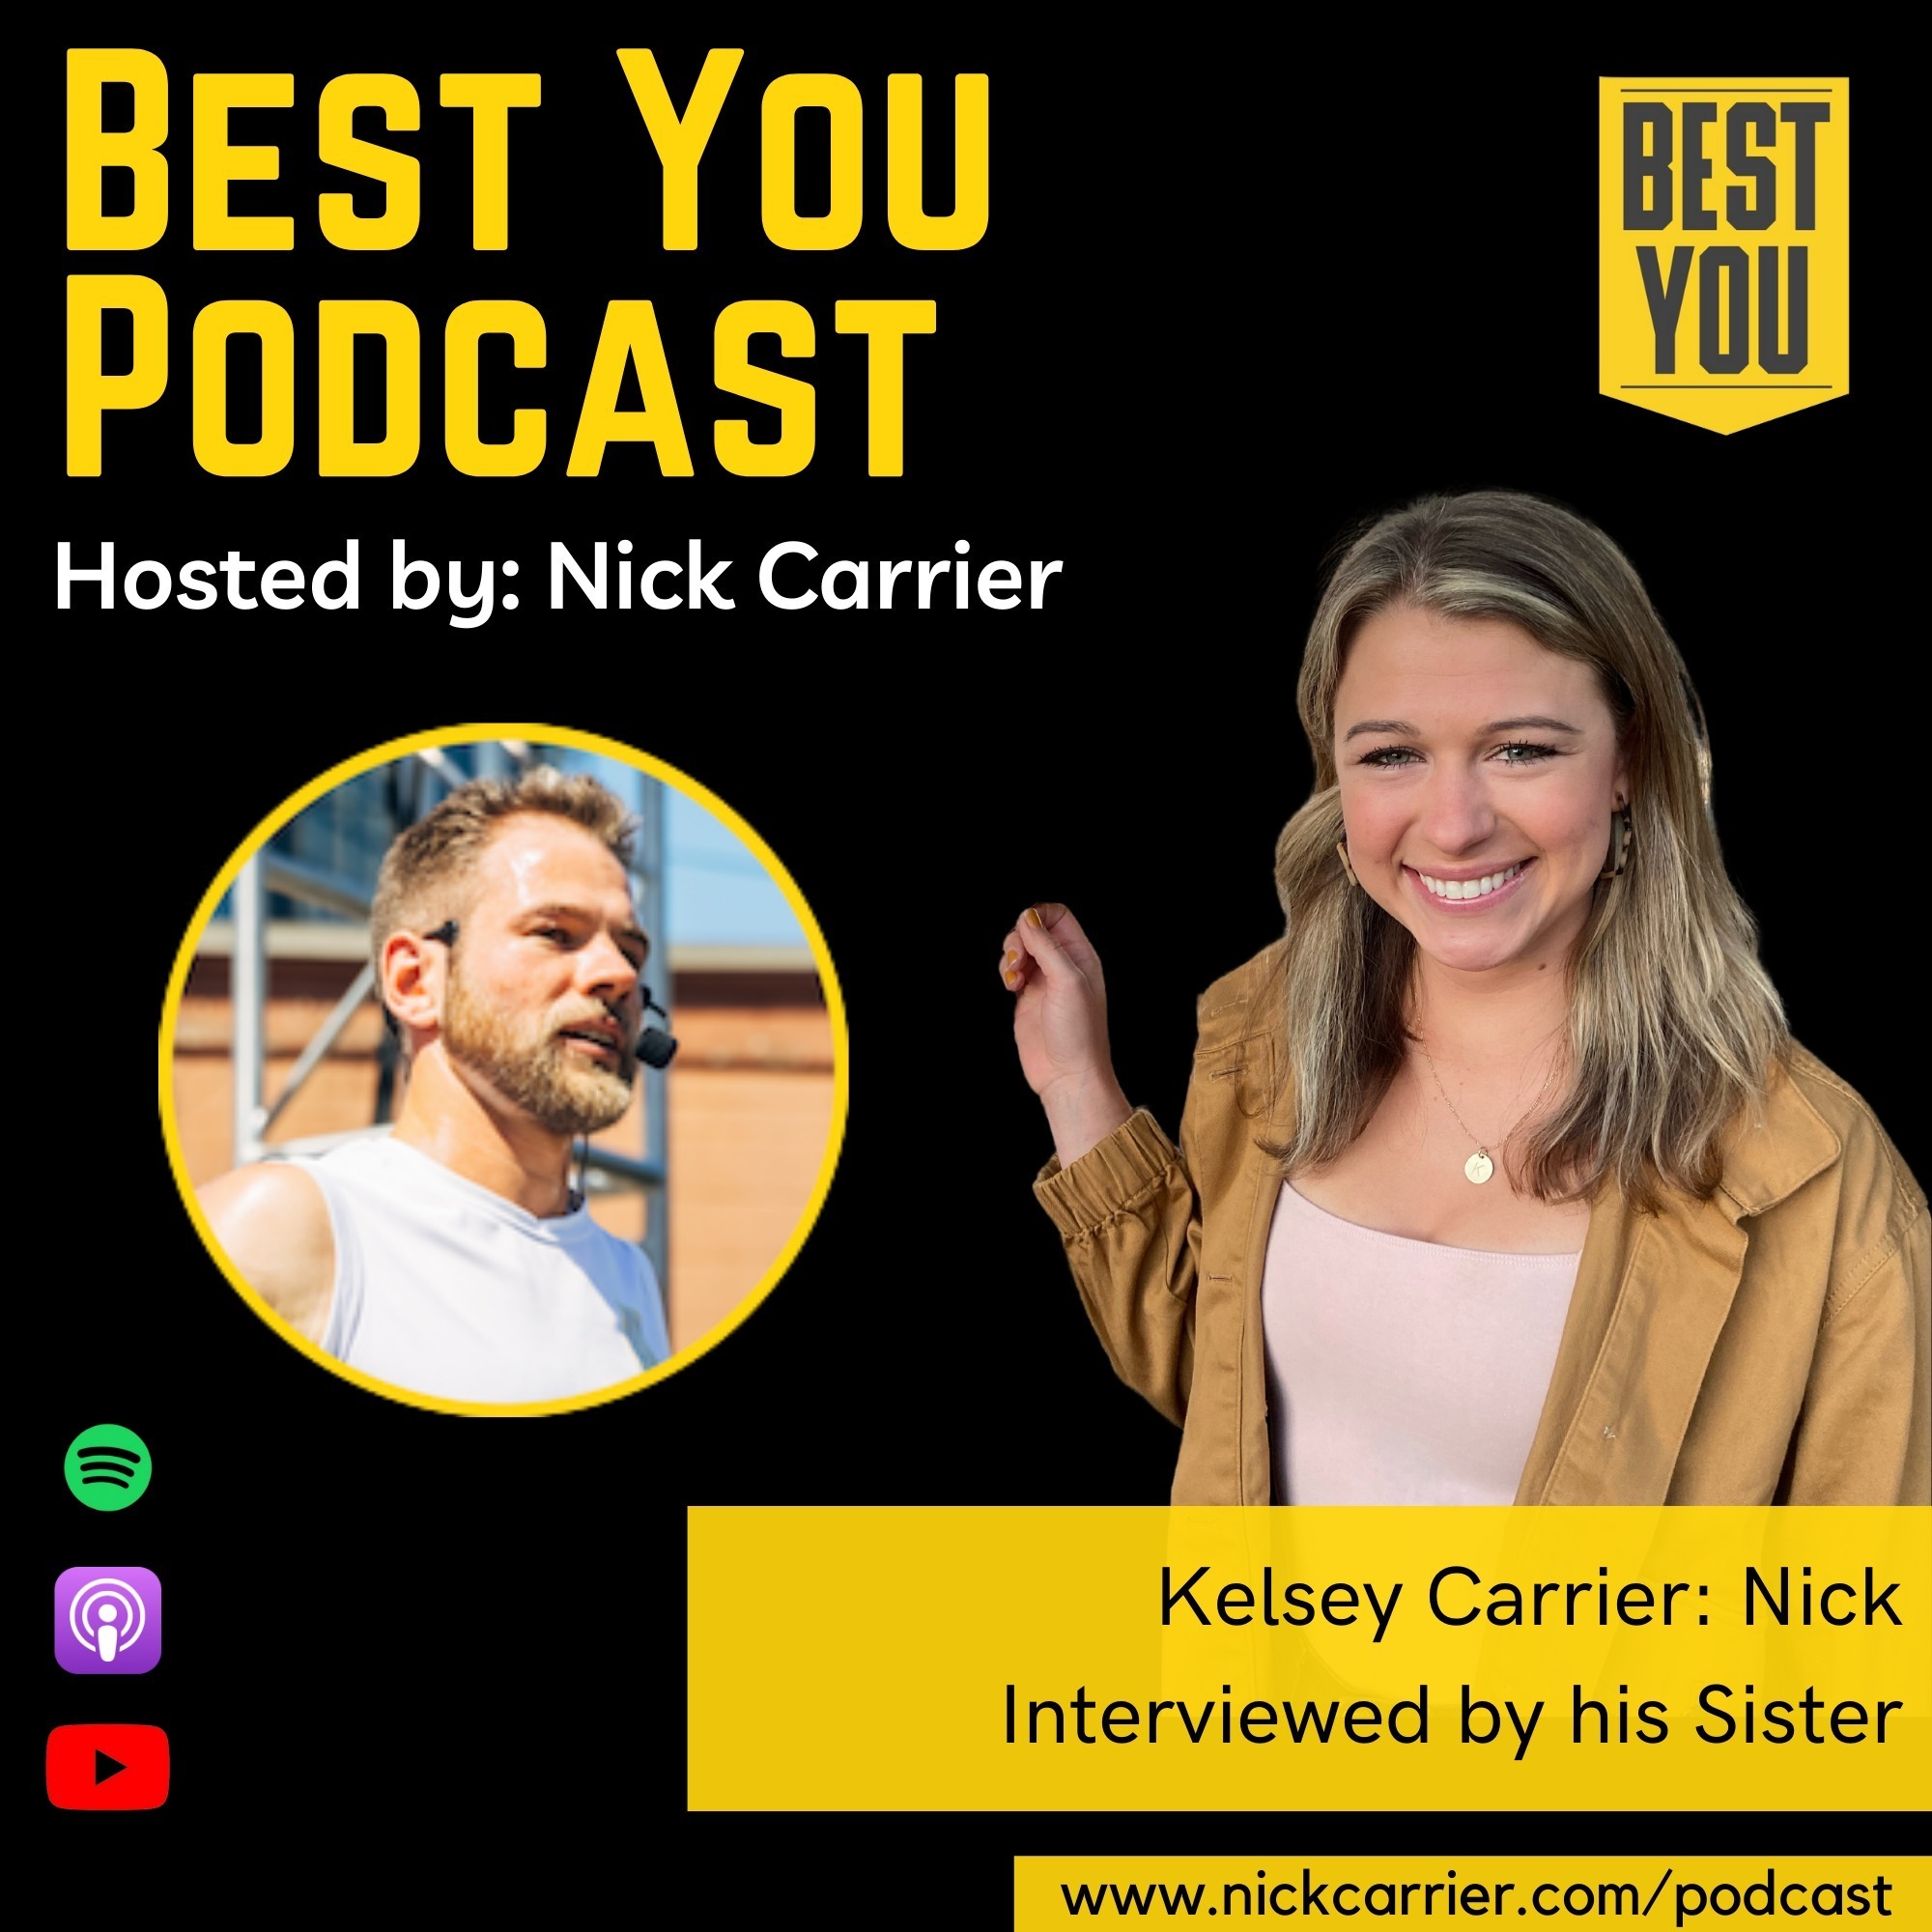 Kelsey Carrier - Interviewing Nick (Part 1)